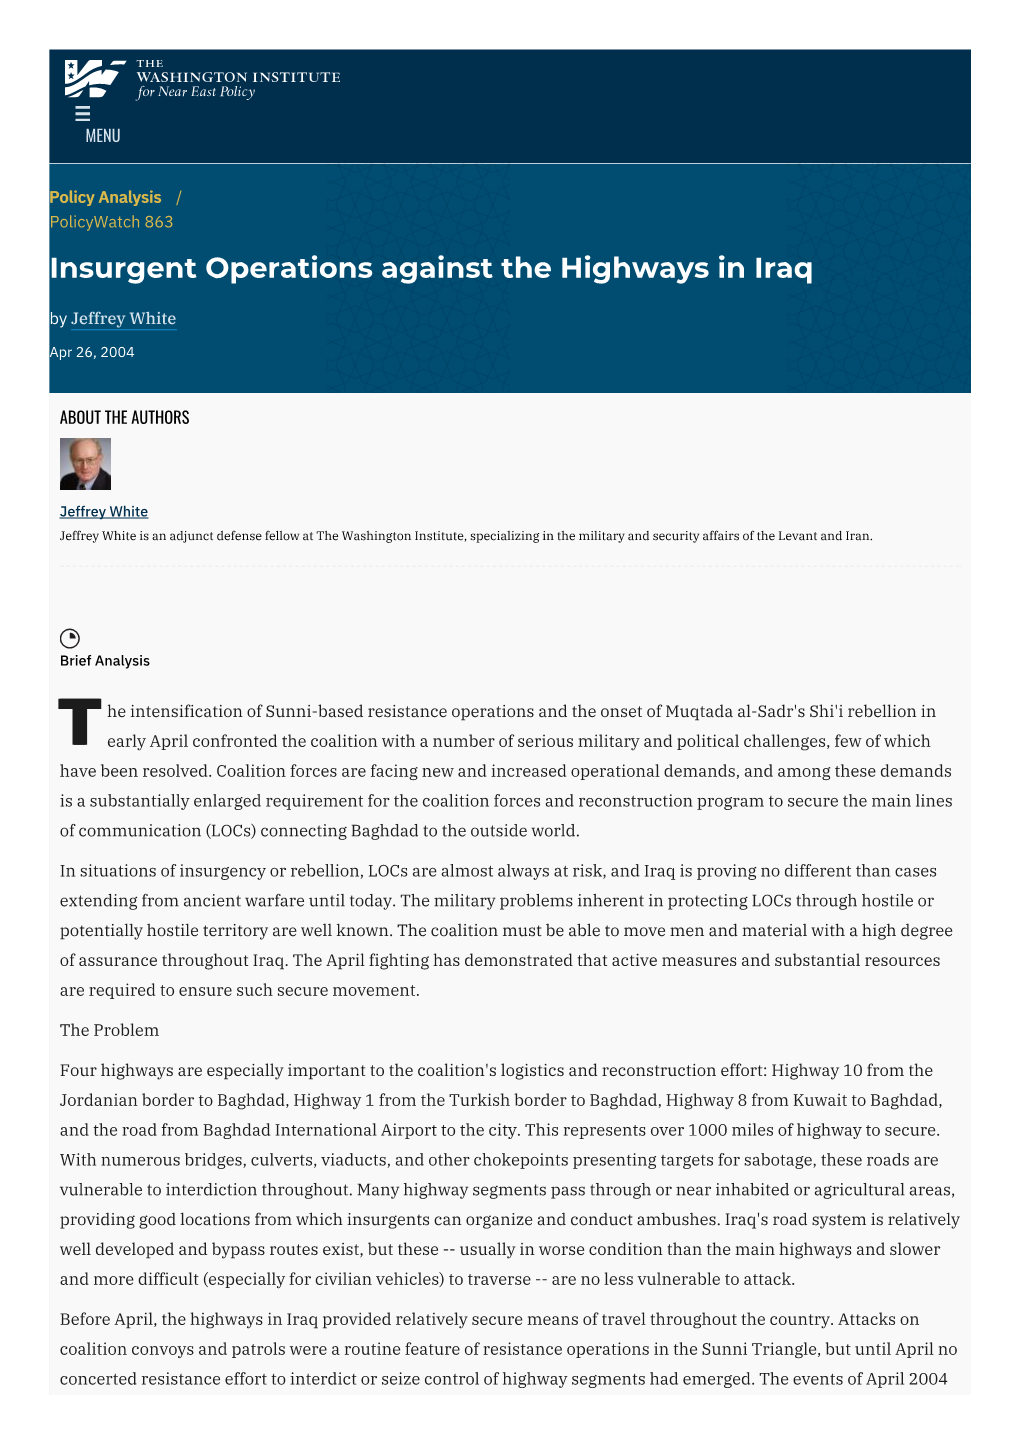 Insurgent Operations Against the Highways in Iraq | the Washington